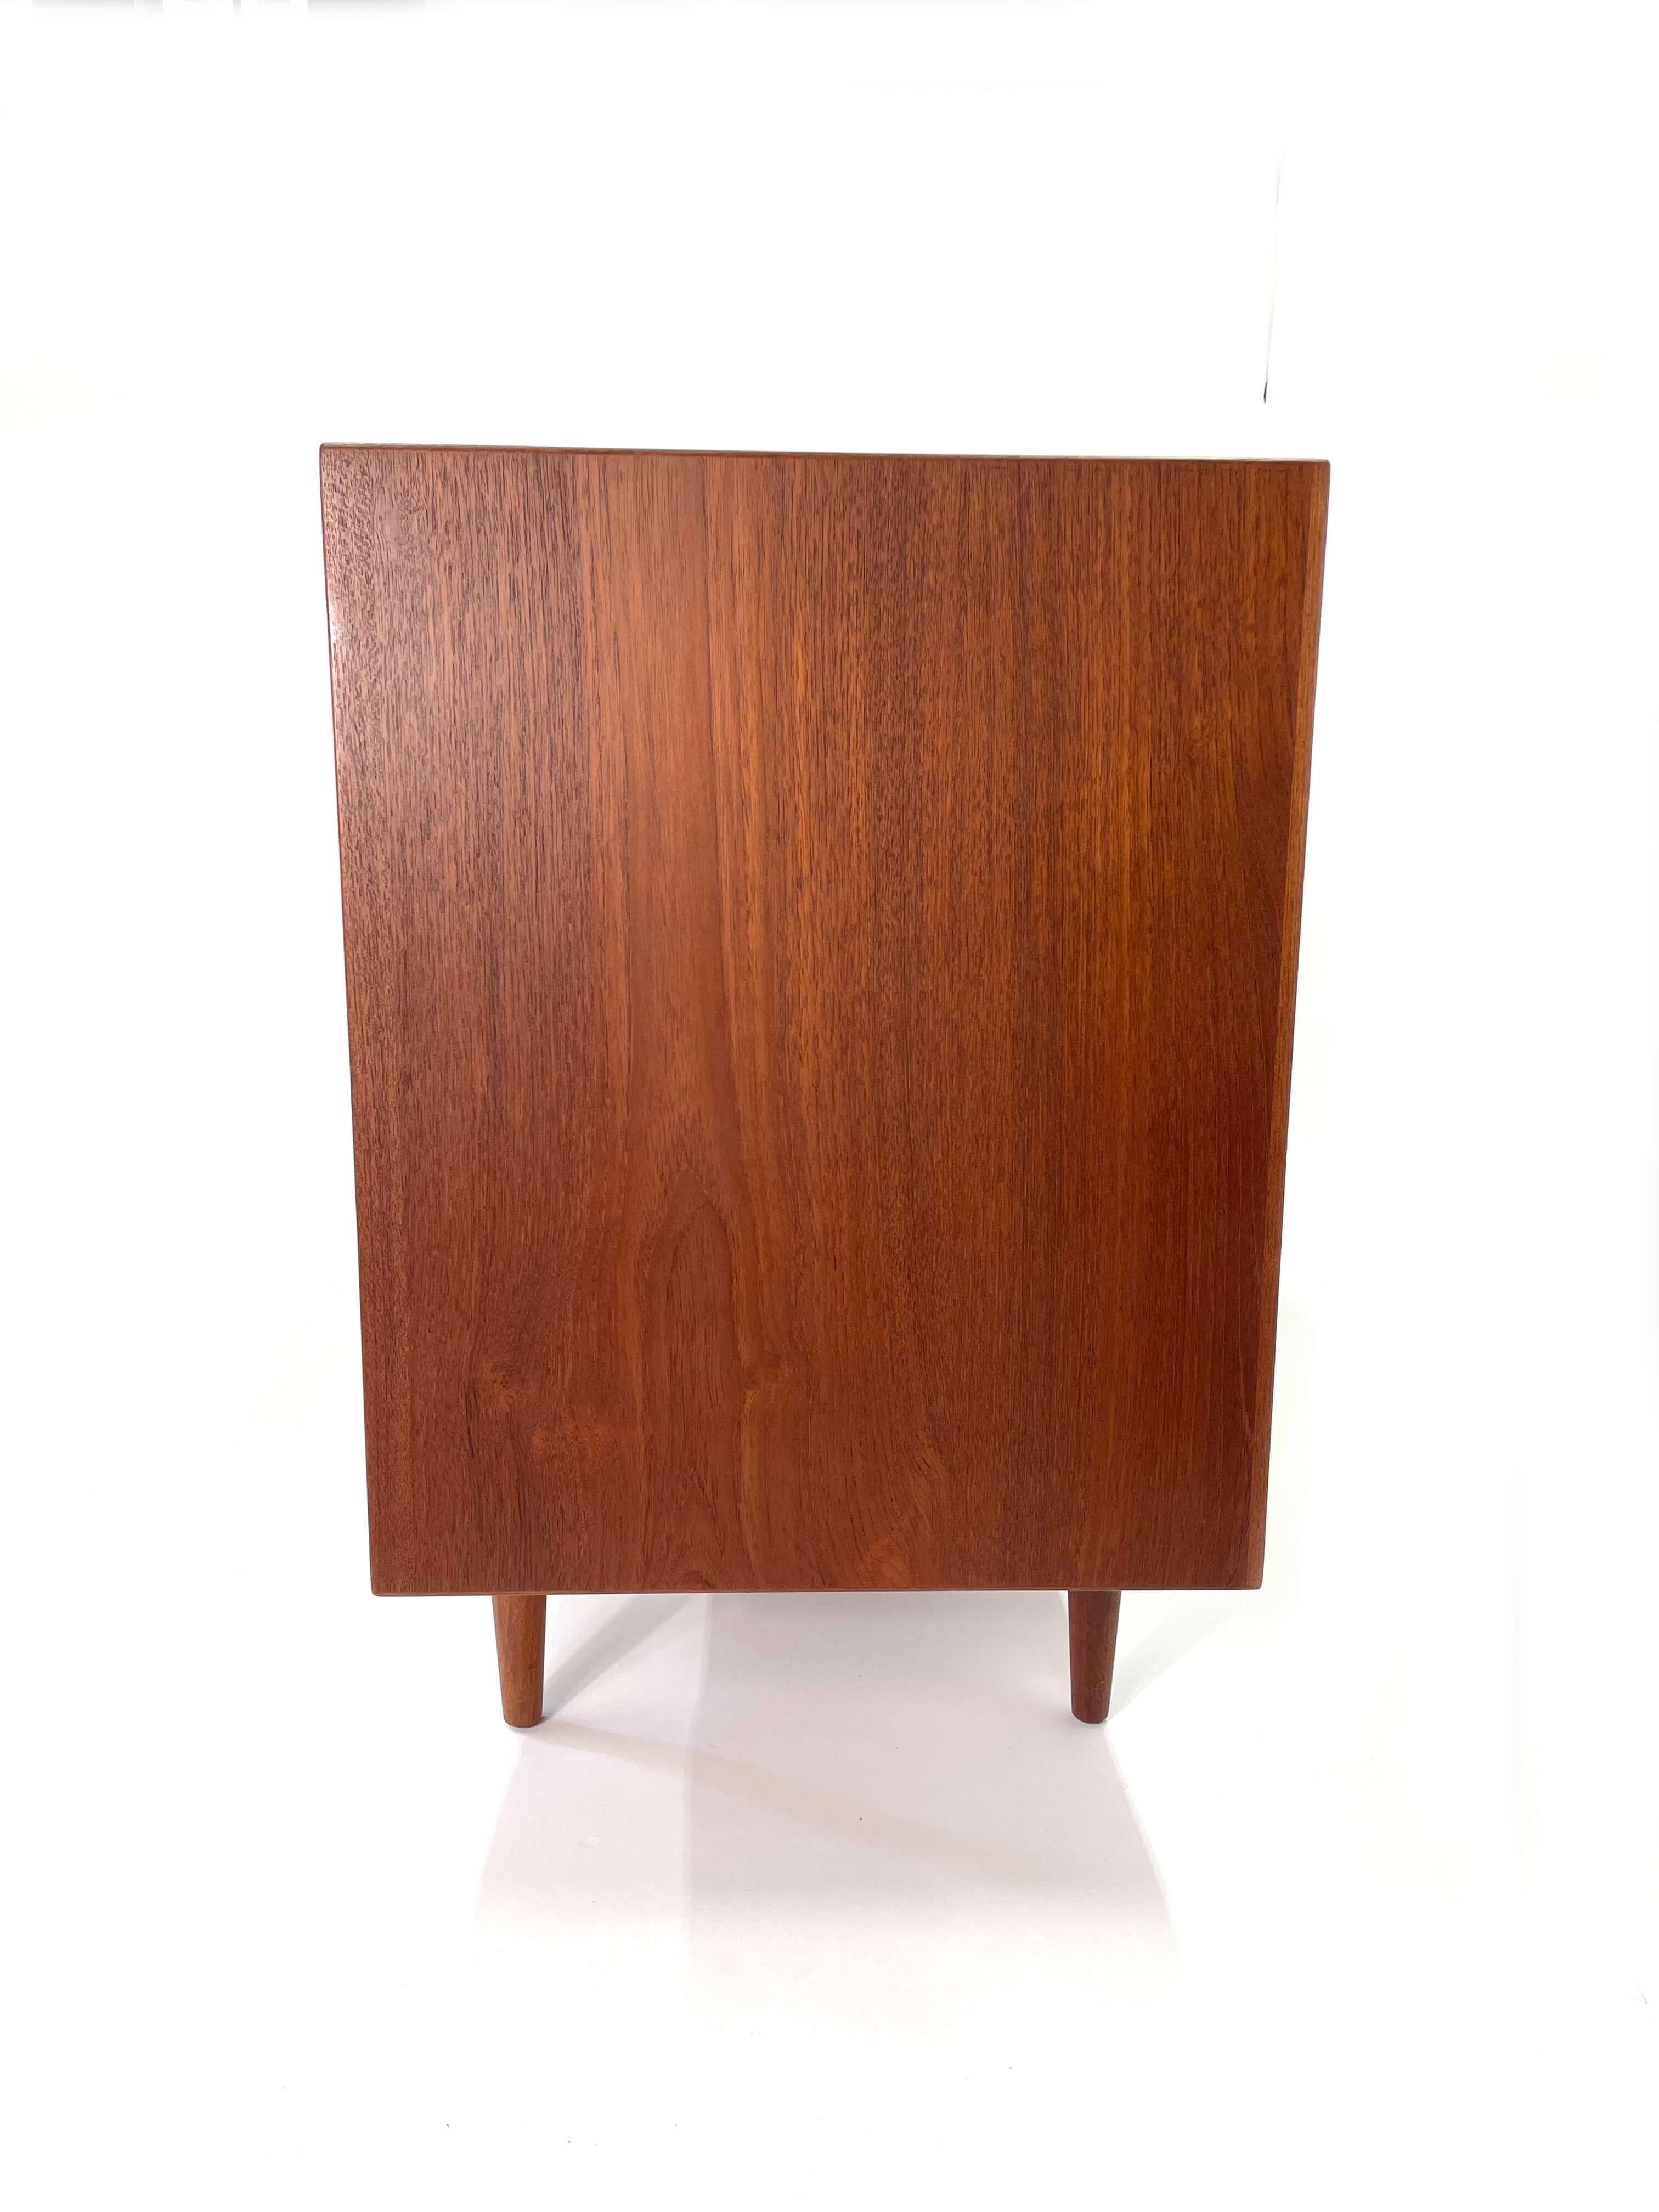 An iconic design by Arne Vodder 'Triennale' dresser was produced by Sibast Mobler, circa 1950. Constructed in teak, the long eight drawer dresser is a classic piece of danish modern furniture. The drawer faces are both architectural and functional